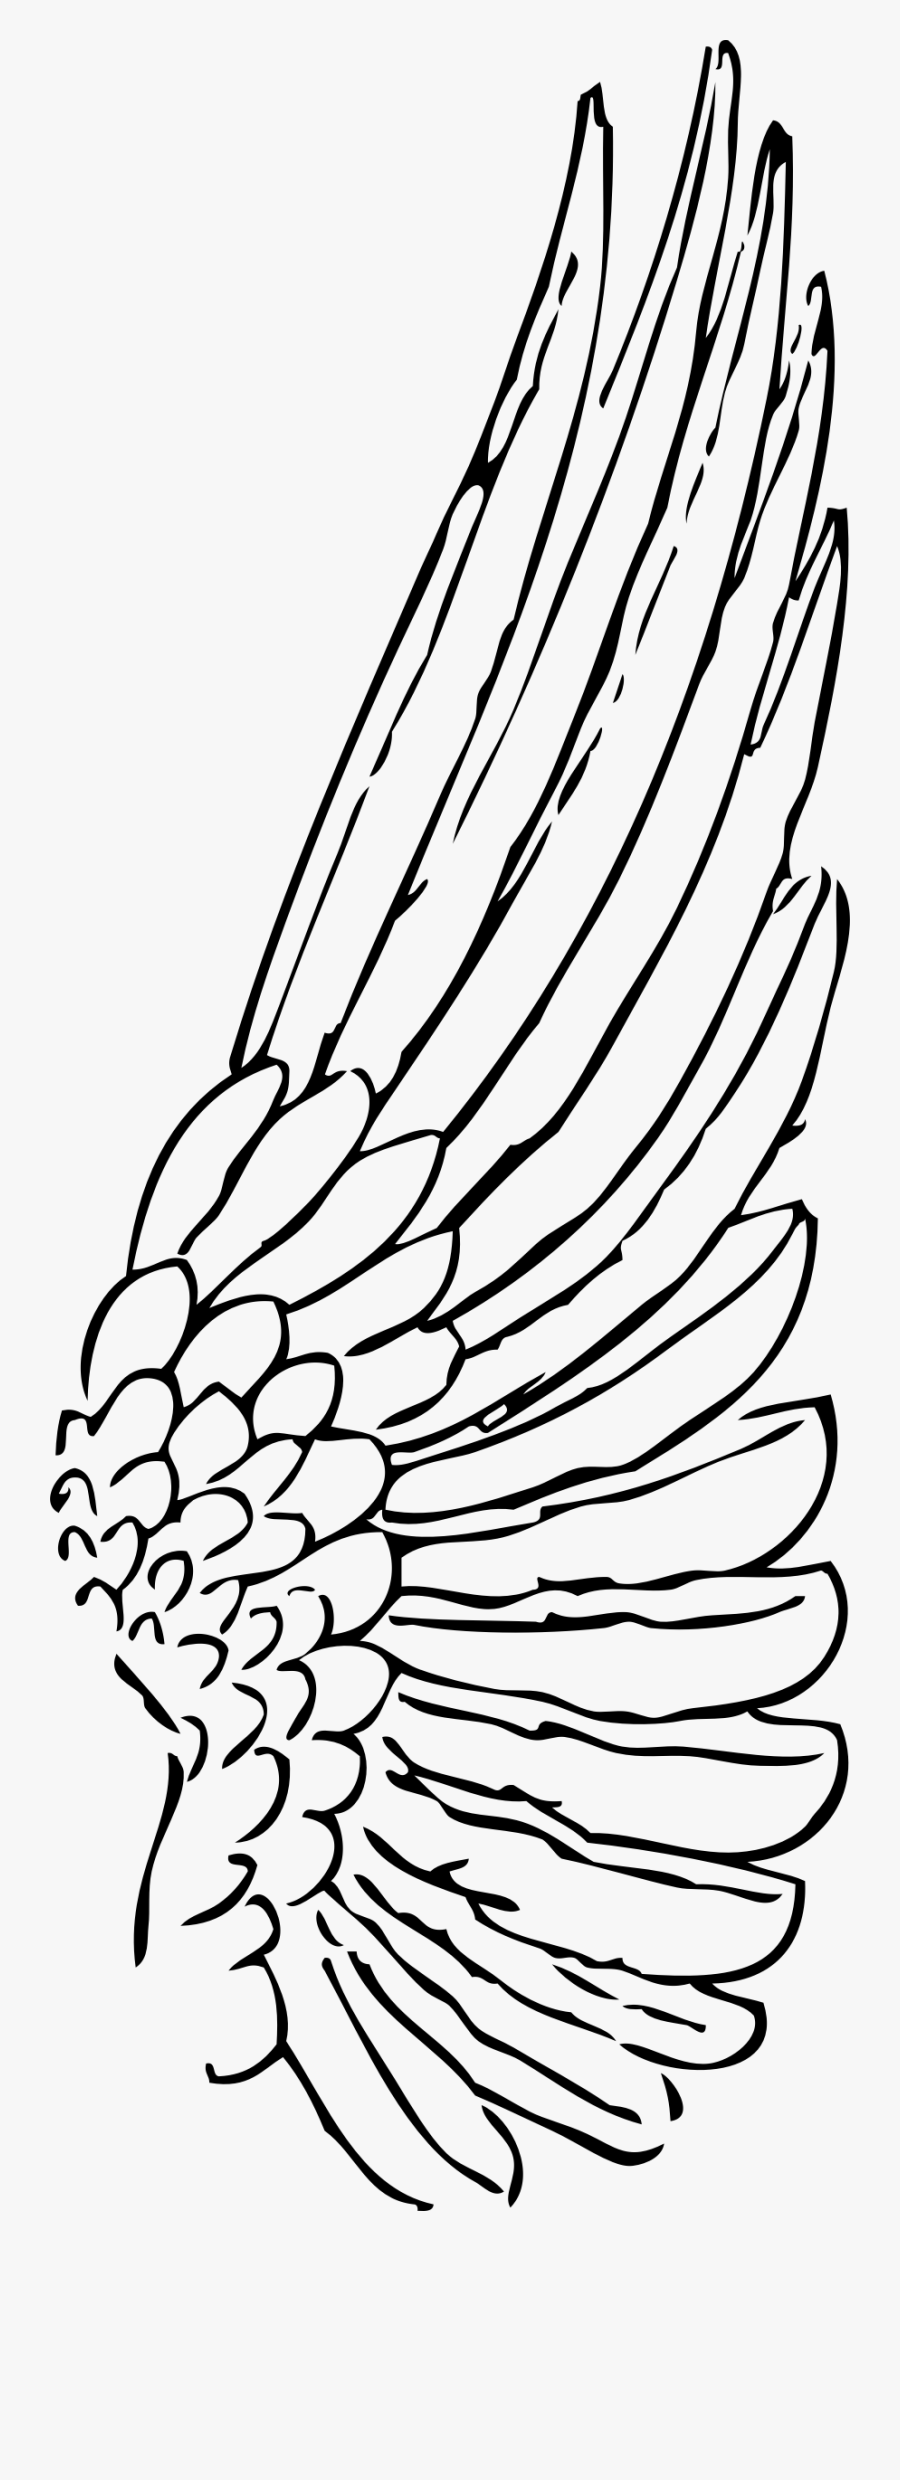 Transparent Turkey Feather Clipart Black And White - Wing Clipart, Transparent Clipart